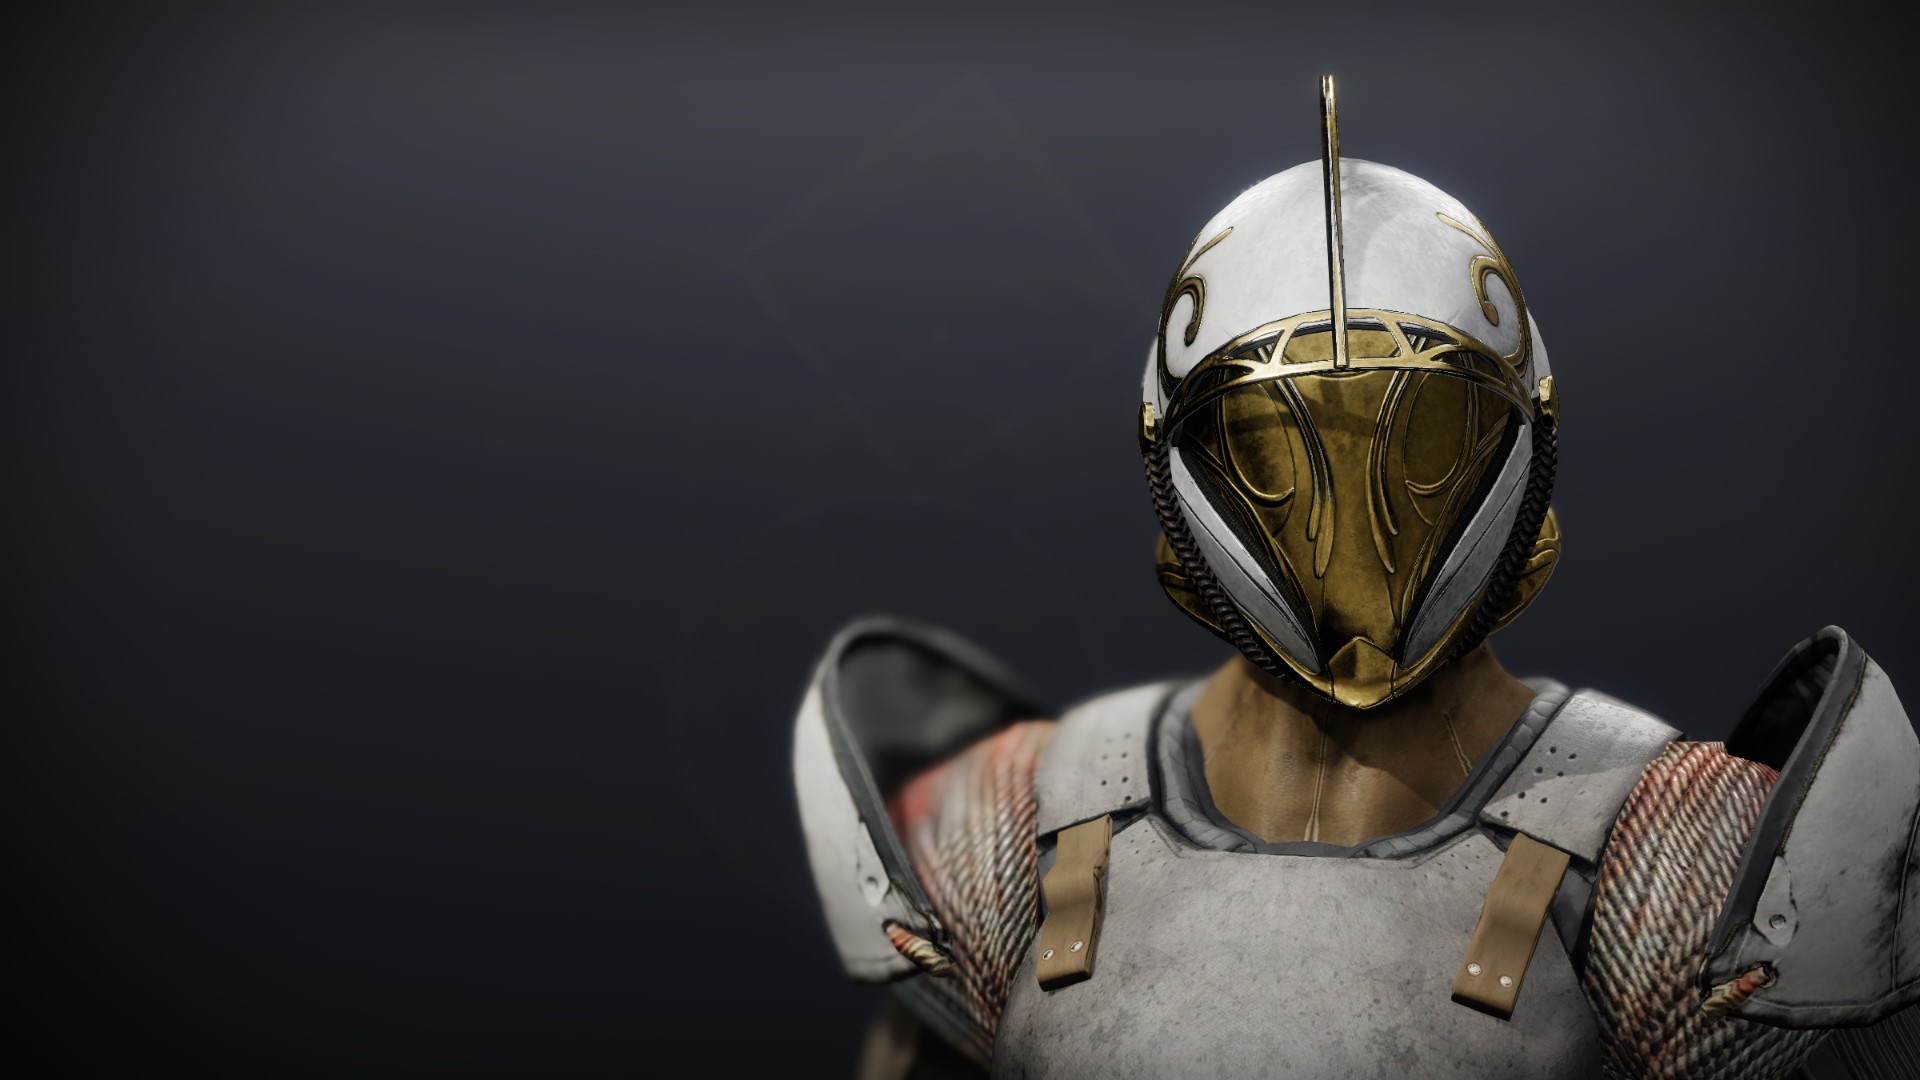 An in-game render of the Sunstead Helm (Magnificent).